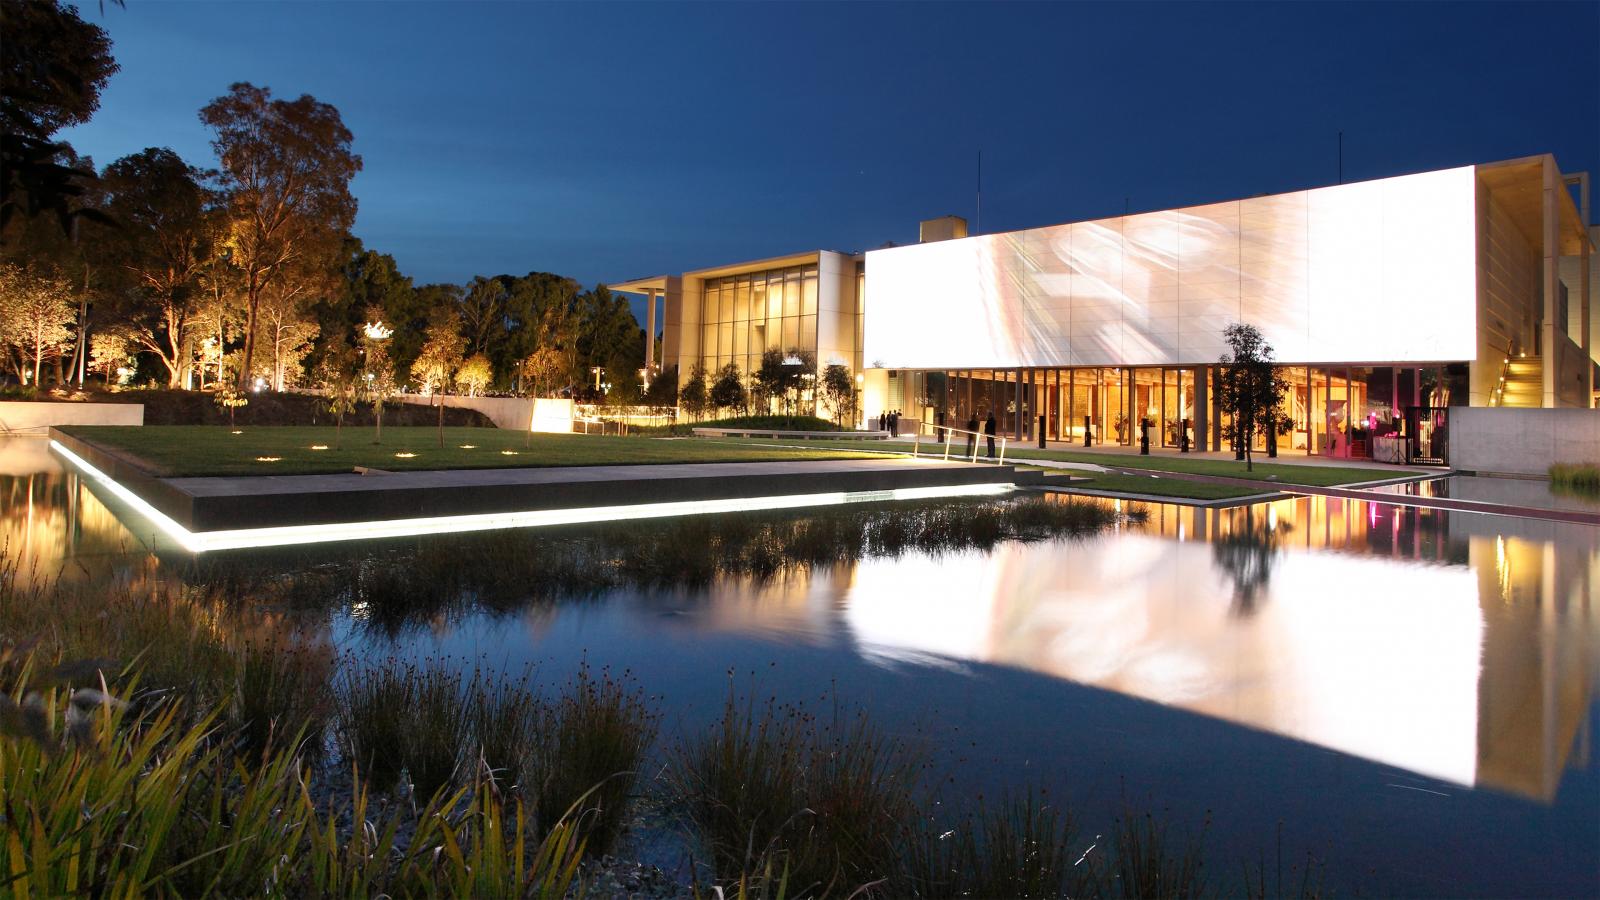 A modern building with large illuminated panels is situated near a serene reflecting pool at dusk. The structure, reminiscent of the elegant design of the NGA, is surrounded by trees and a well-lit Australian garden, adding to the tranquil ambiance. The clear sky and calm water create a peaceful scene.